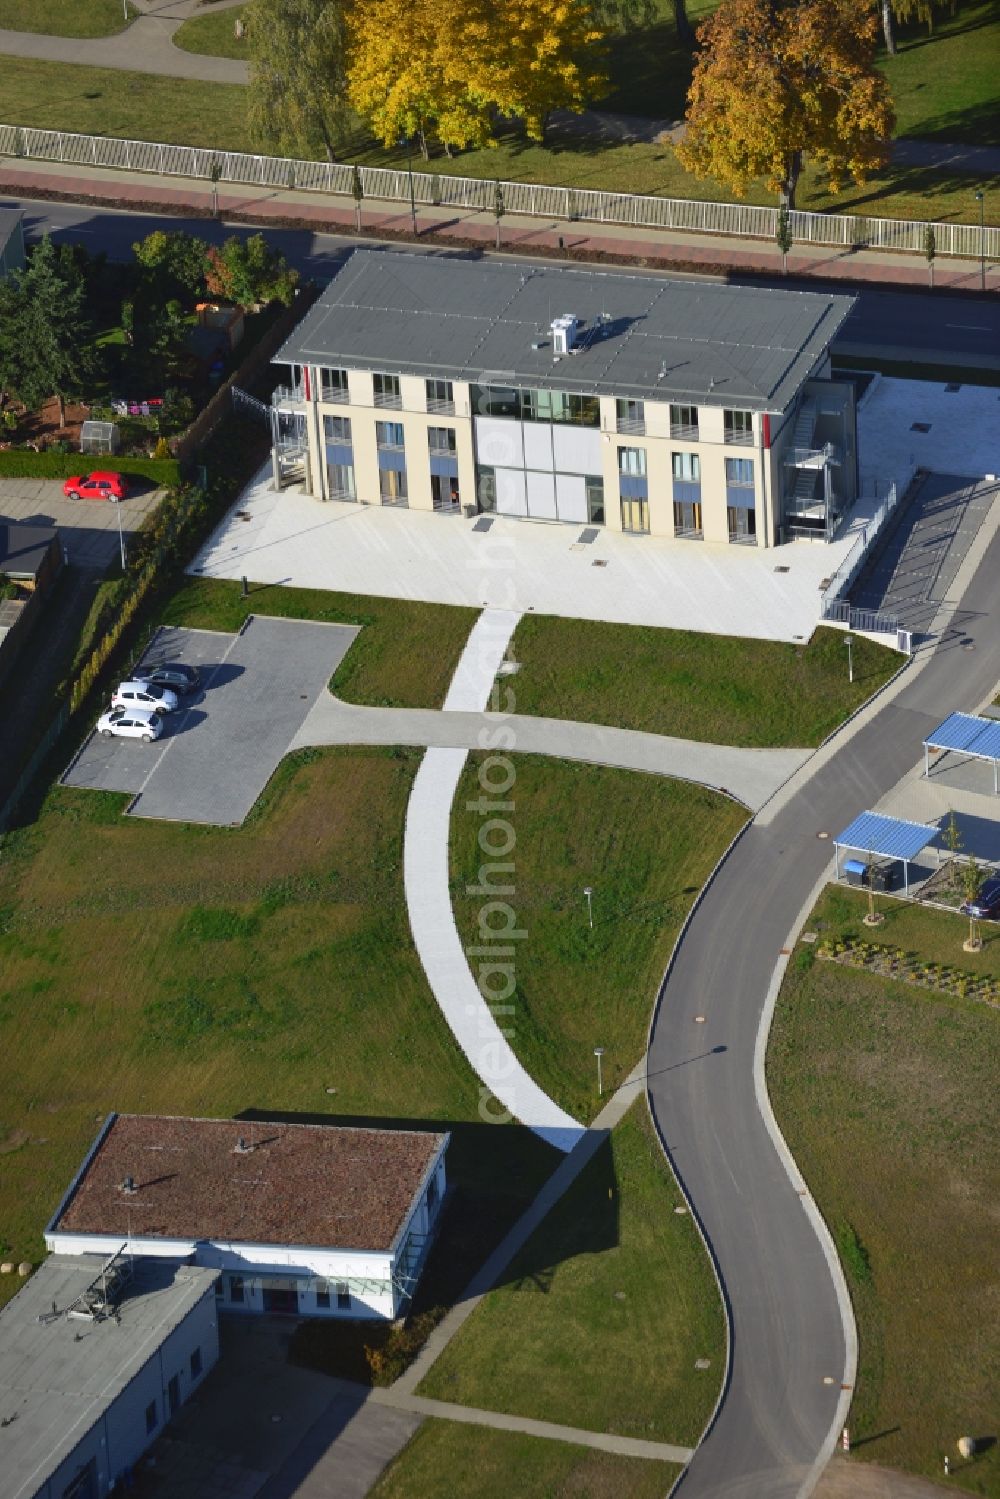 Aerial image Stavenhagen - View at the new built main administration of the Wasser Zweckverband Malchin Stavenhagen at Schultetusstraße in Stavenhagen in the federal state Mecklenburg-Vorpommern. The WasserZweckverband Malchin Stavenhagen consists of 20 member communities. The architecture office Anke Diesterheft was responsible for the new building